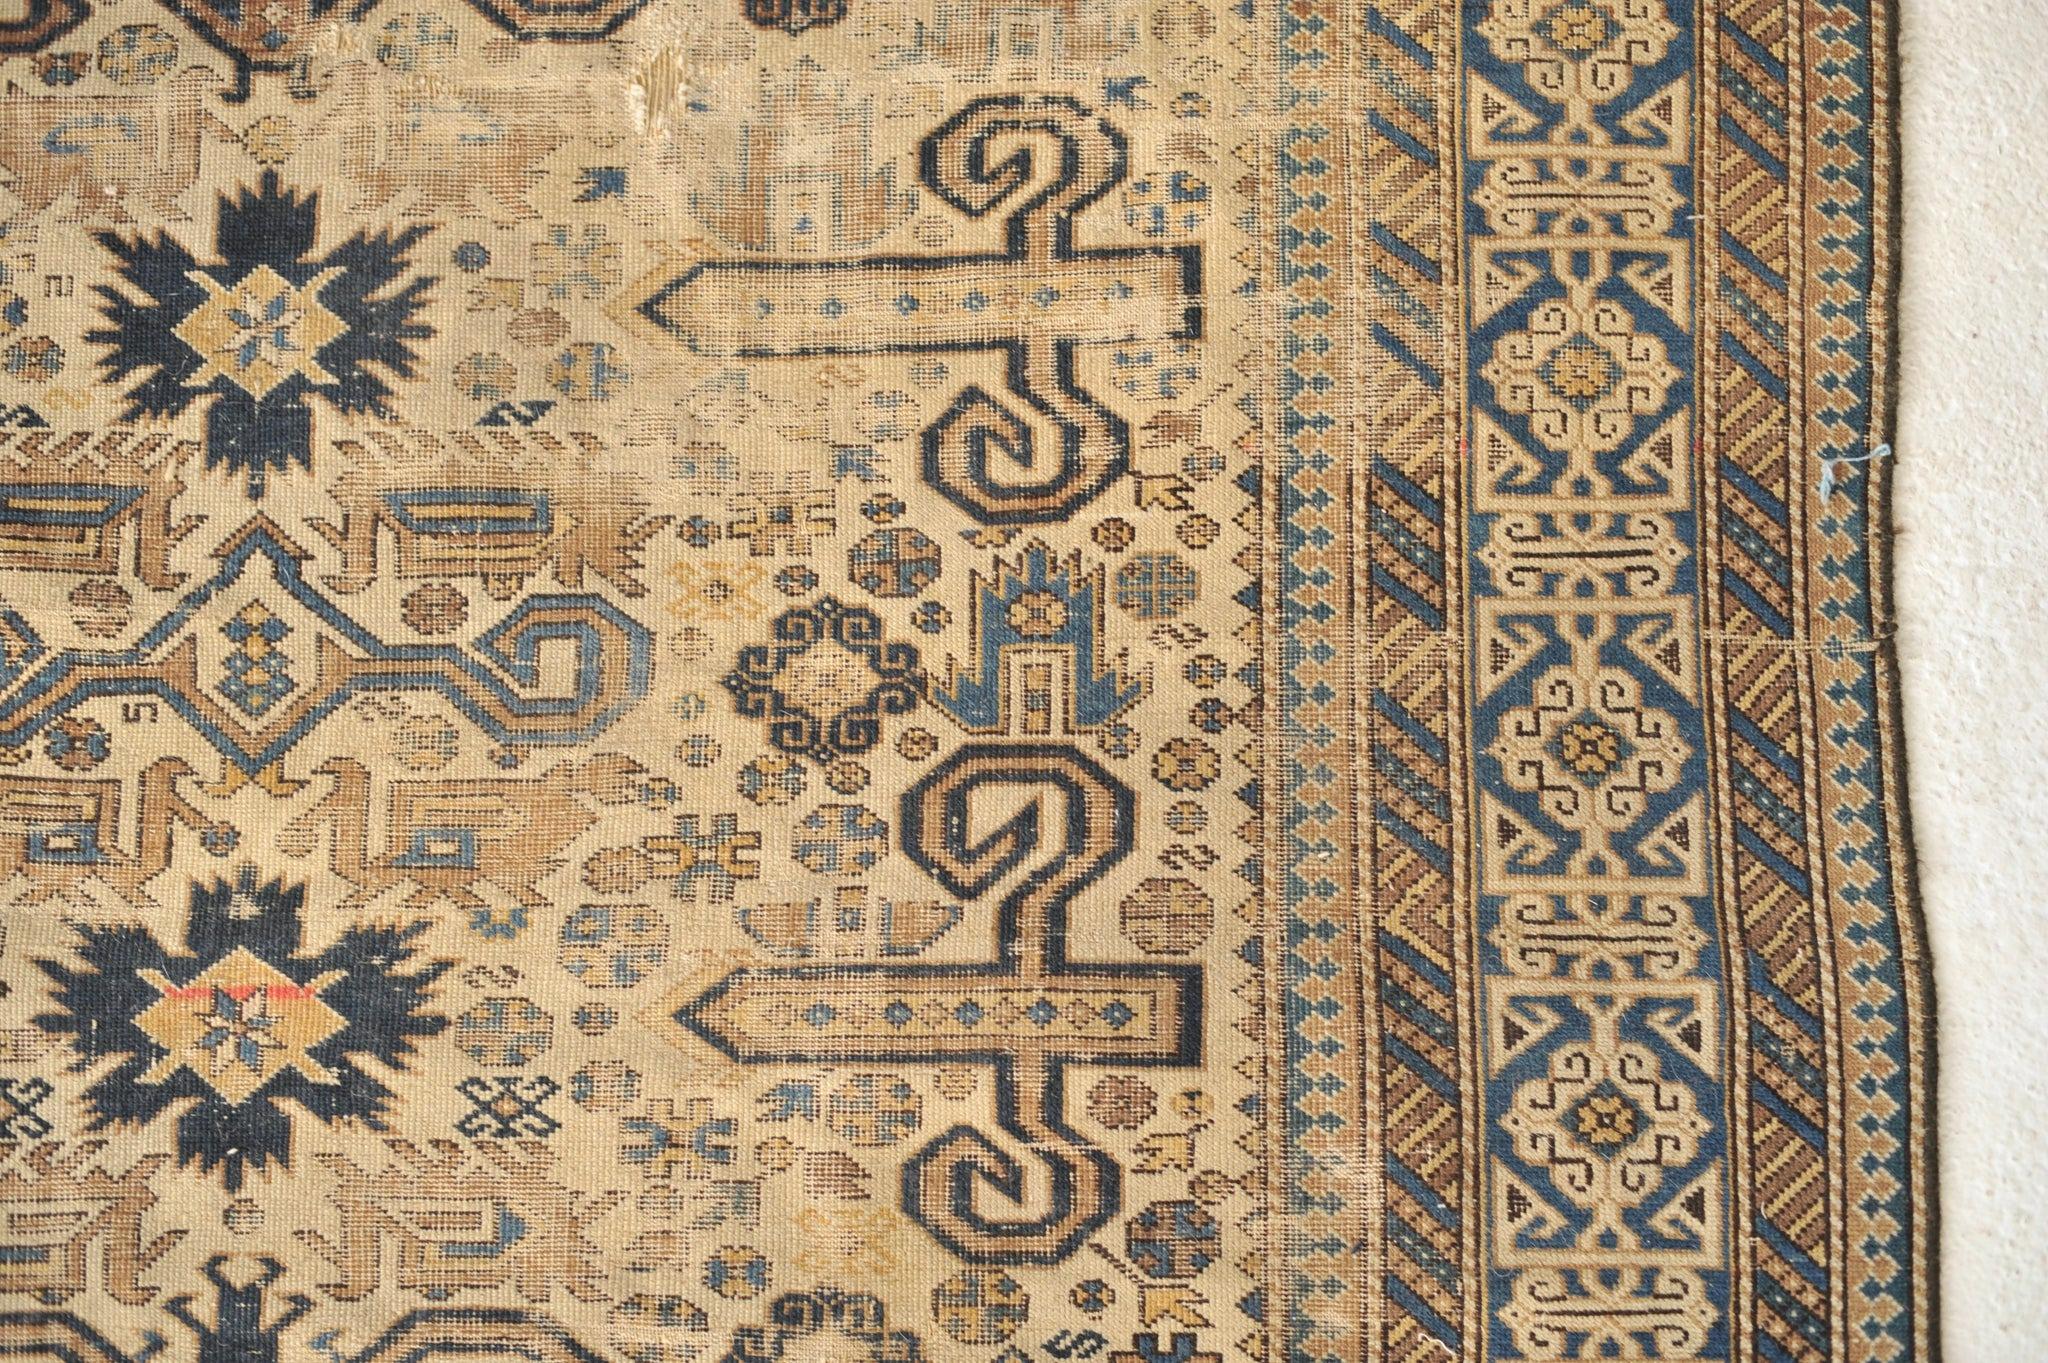 Super Fine Antique Caucasian Prepidil  Gorgeous Drawing with Stylized Ram Horns in Beige & Navy 

Size: 4 x 5
Age: Antique
Pile: Low with age-related patina, see pics. Great character piece

This rug is one-of-a-kind, only one in the world, no